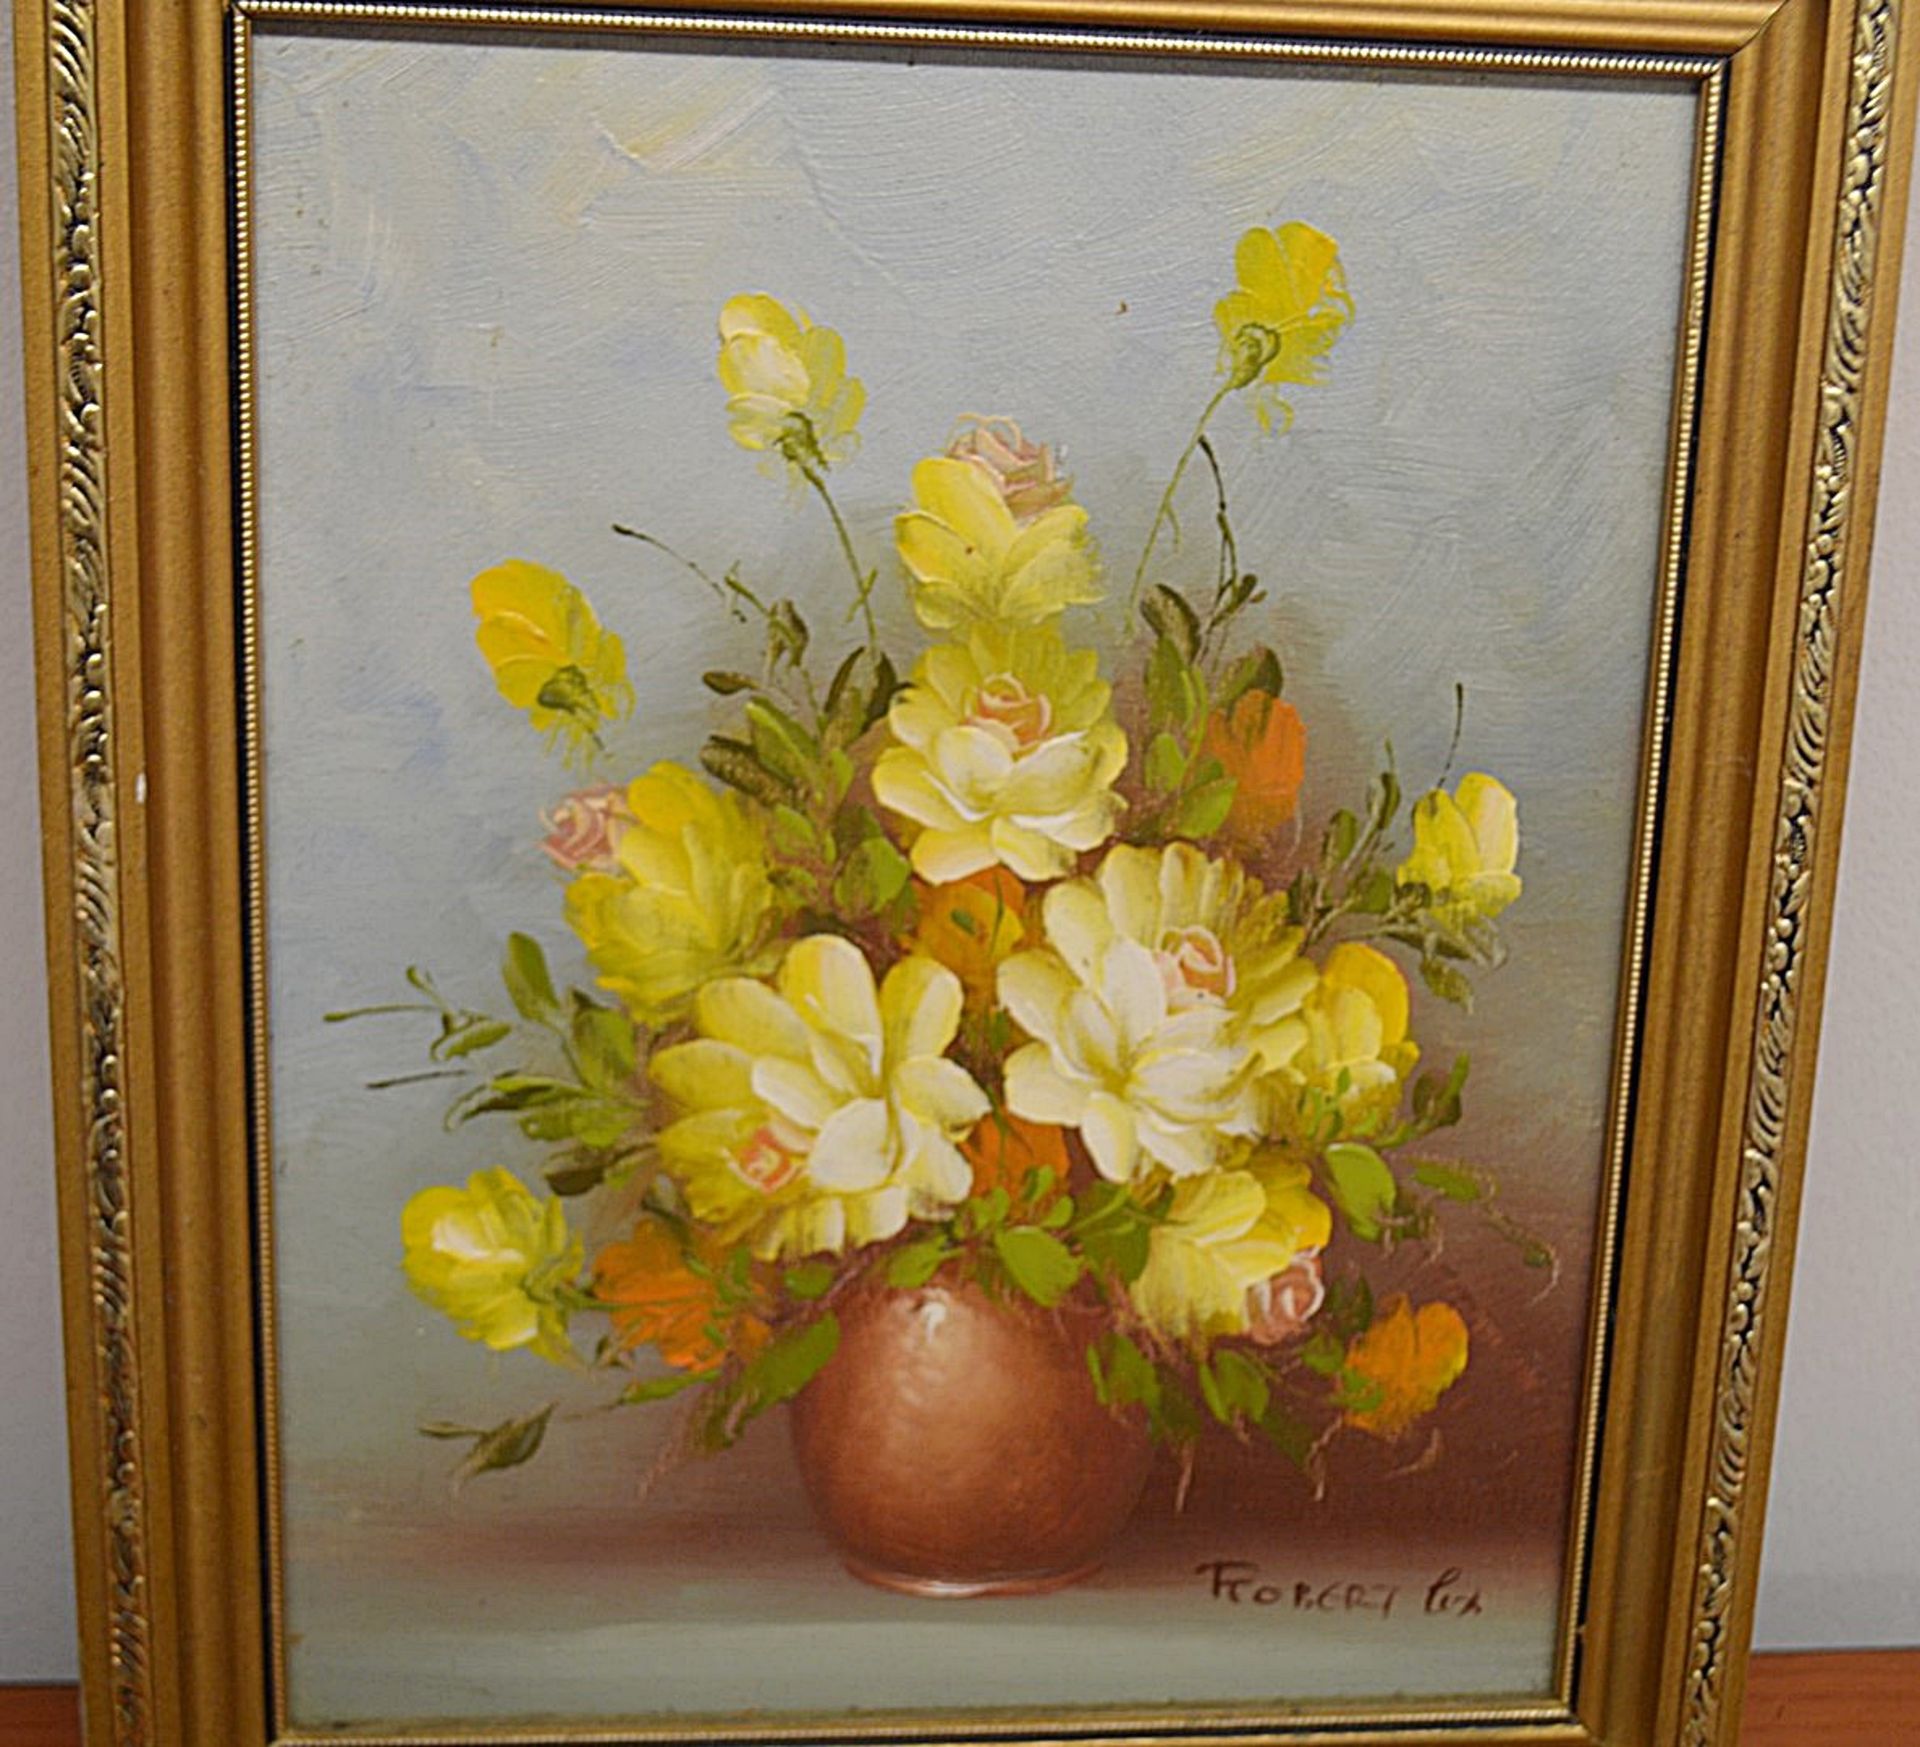 1 x Original Oil Painting Of Flowers On Board - Signed By The Artist - Dimensions: 25 x 30cm - - Image 6 of 6